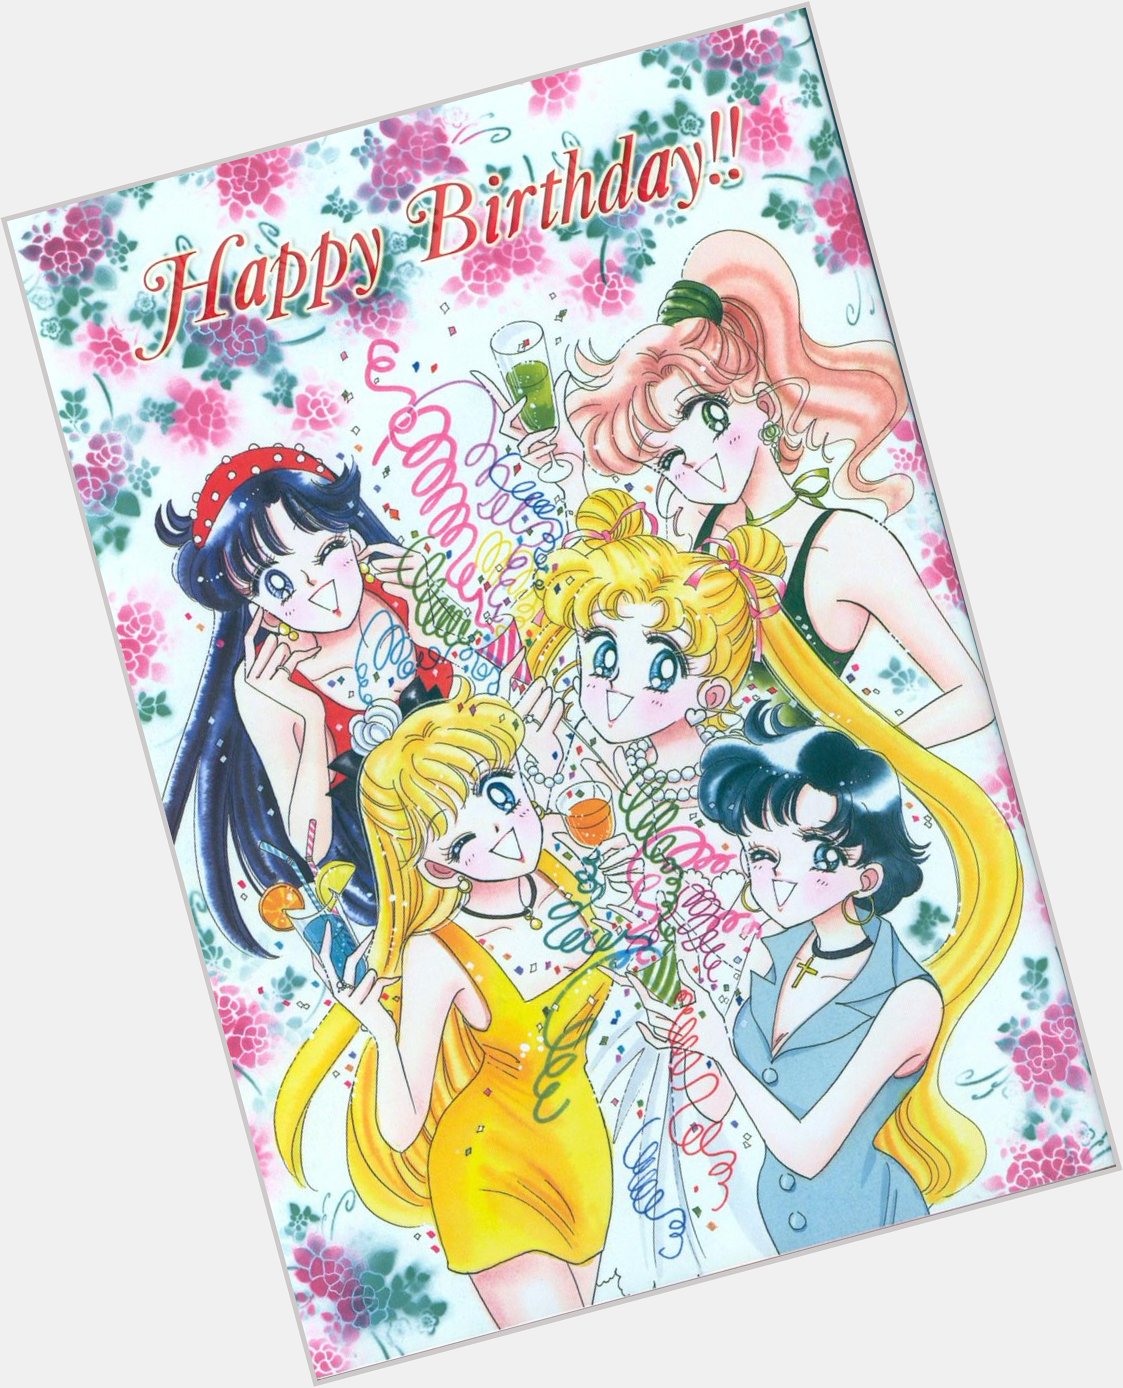 I know it\s no longer the 15th in Japan but still...HAPPY BIRTHDAY NAOKO TAKEUCHI!! Thank you so much for all you do! 